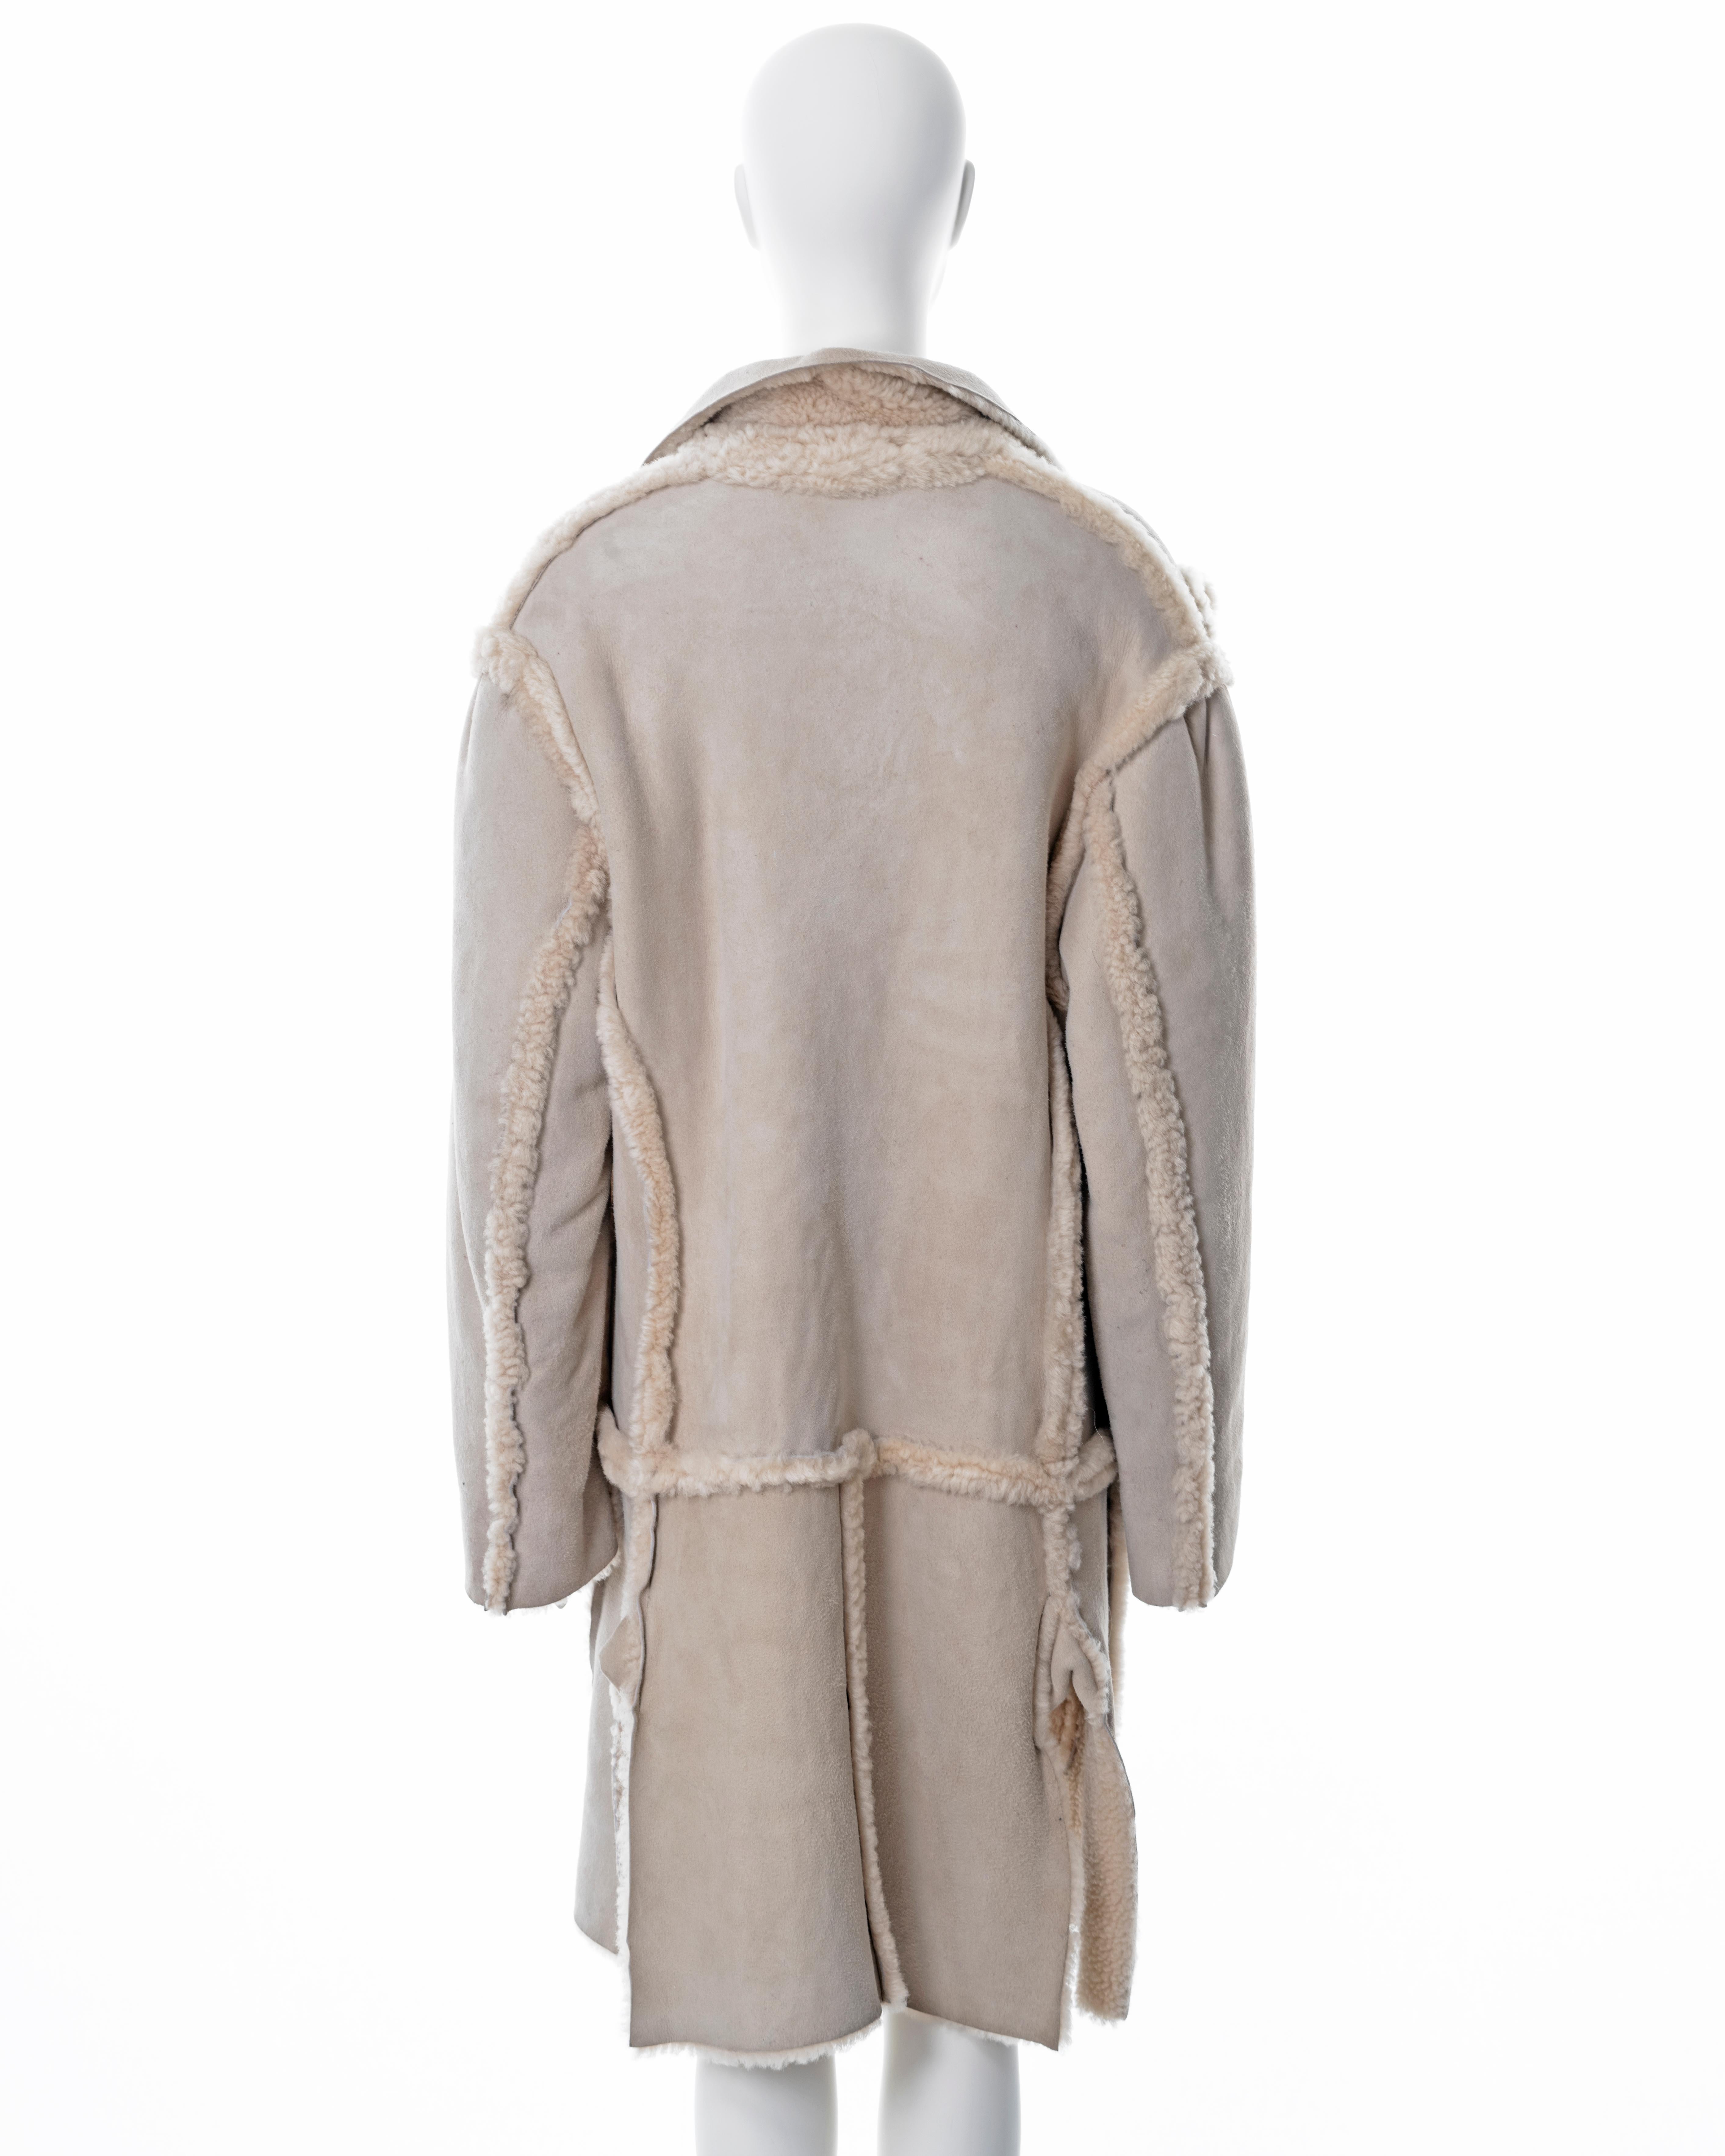 Worlds End by Vivienne Westwood and Malcolm McLaren 'Buffalo' coat, fw 1982 For Sale 7